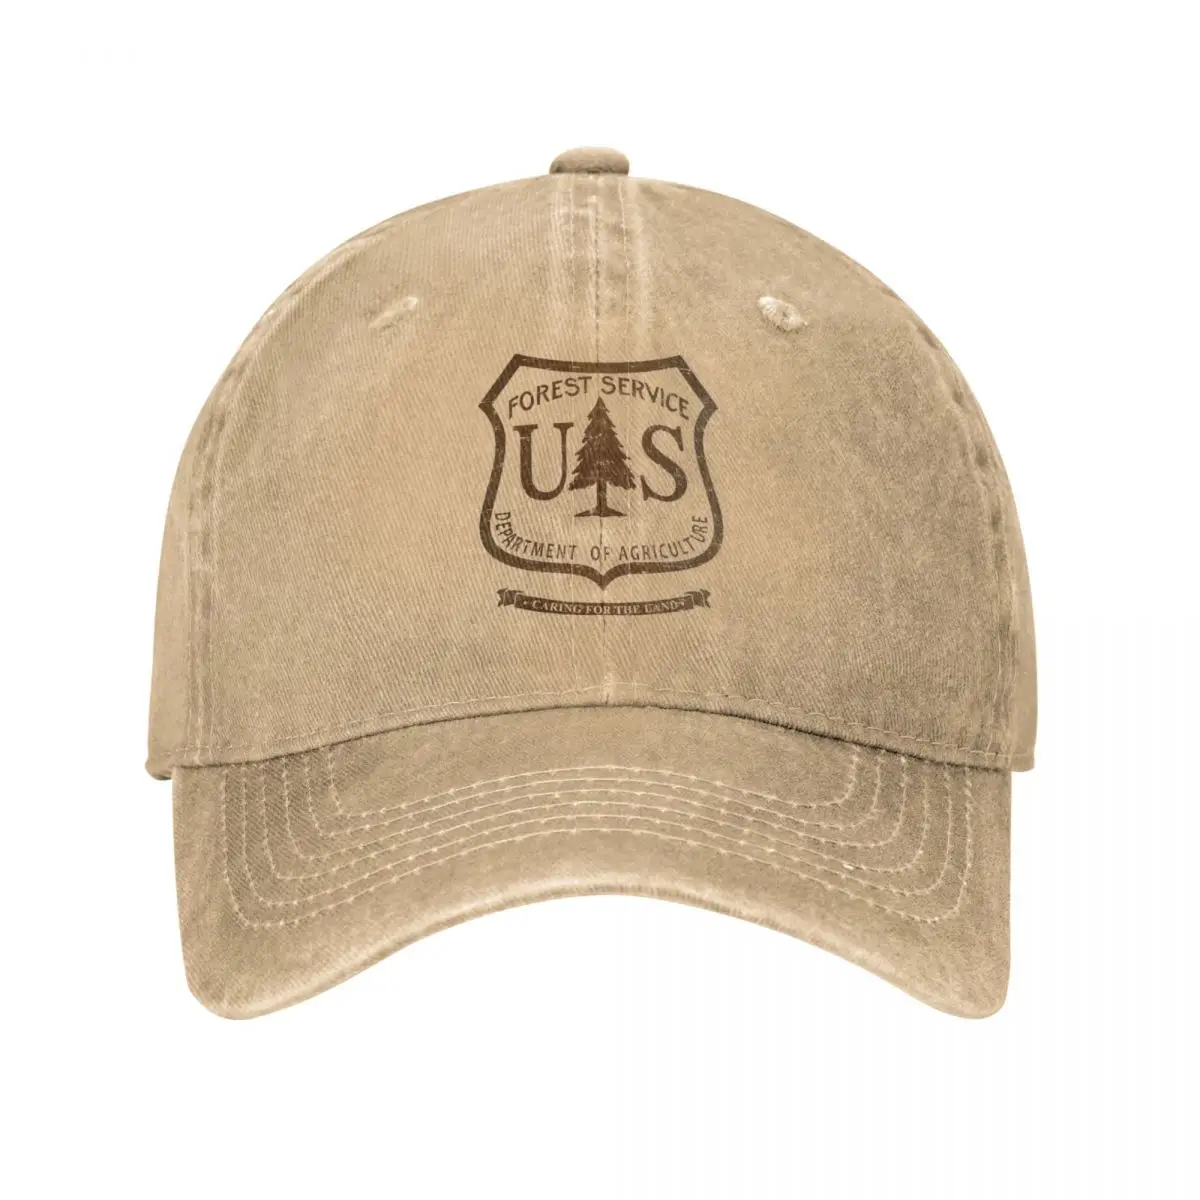 

US Forest Service USFS Baseball Cap Retro Distressed Washed Sun Cap for Men Women Outdoor All Seasons Travel Adjustable Caps Hat